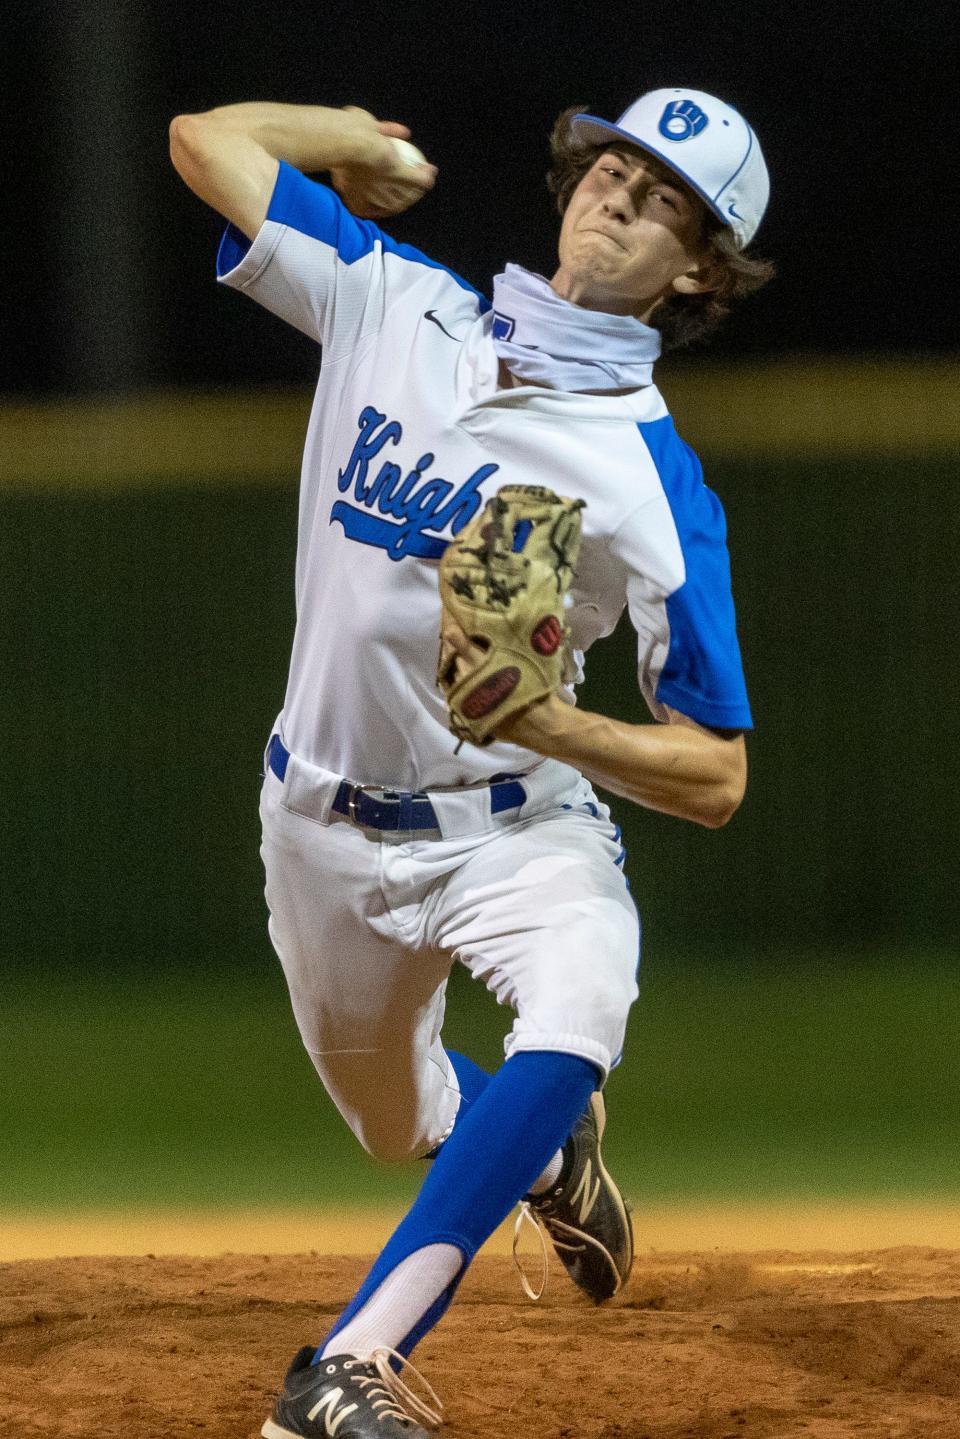 McCallum sophomore Sam Stevens, pitching against Anderson, said competing against the Trojans has been his favorite memory in high school because he went up against players he has known for several years.